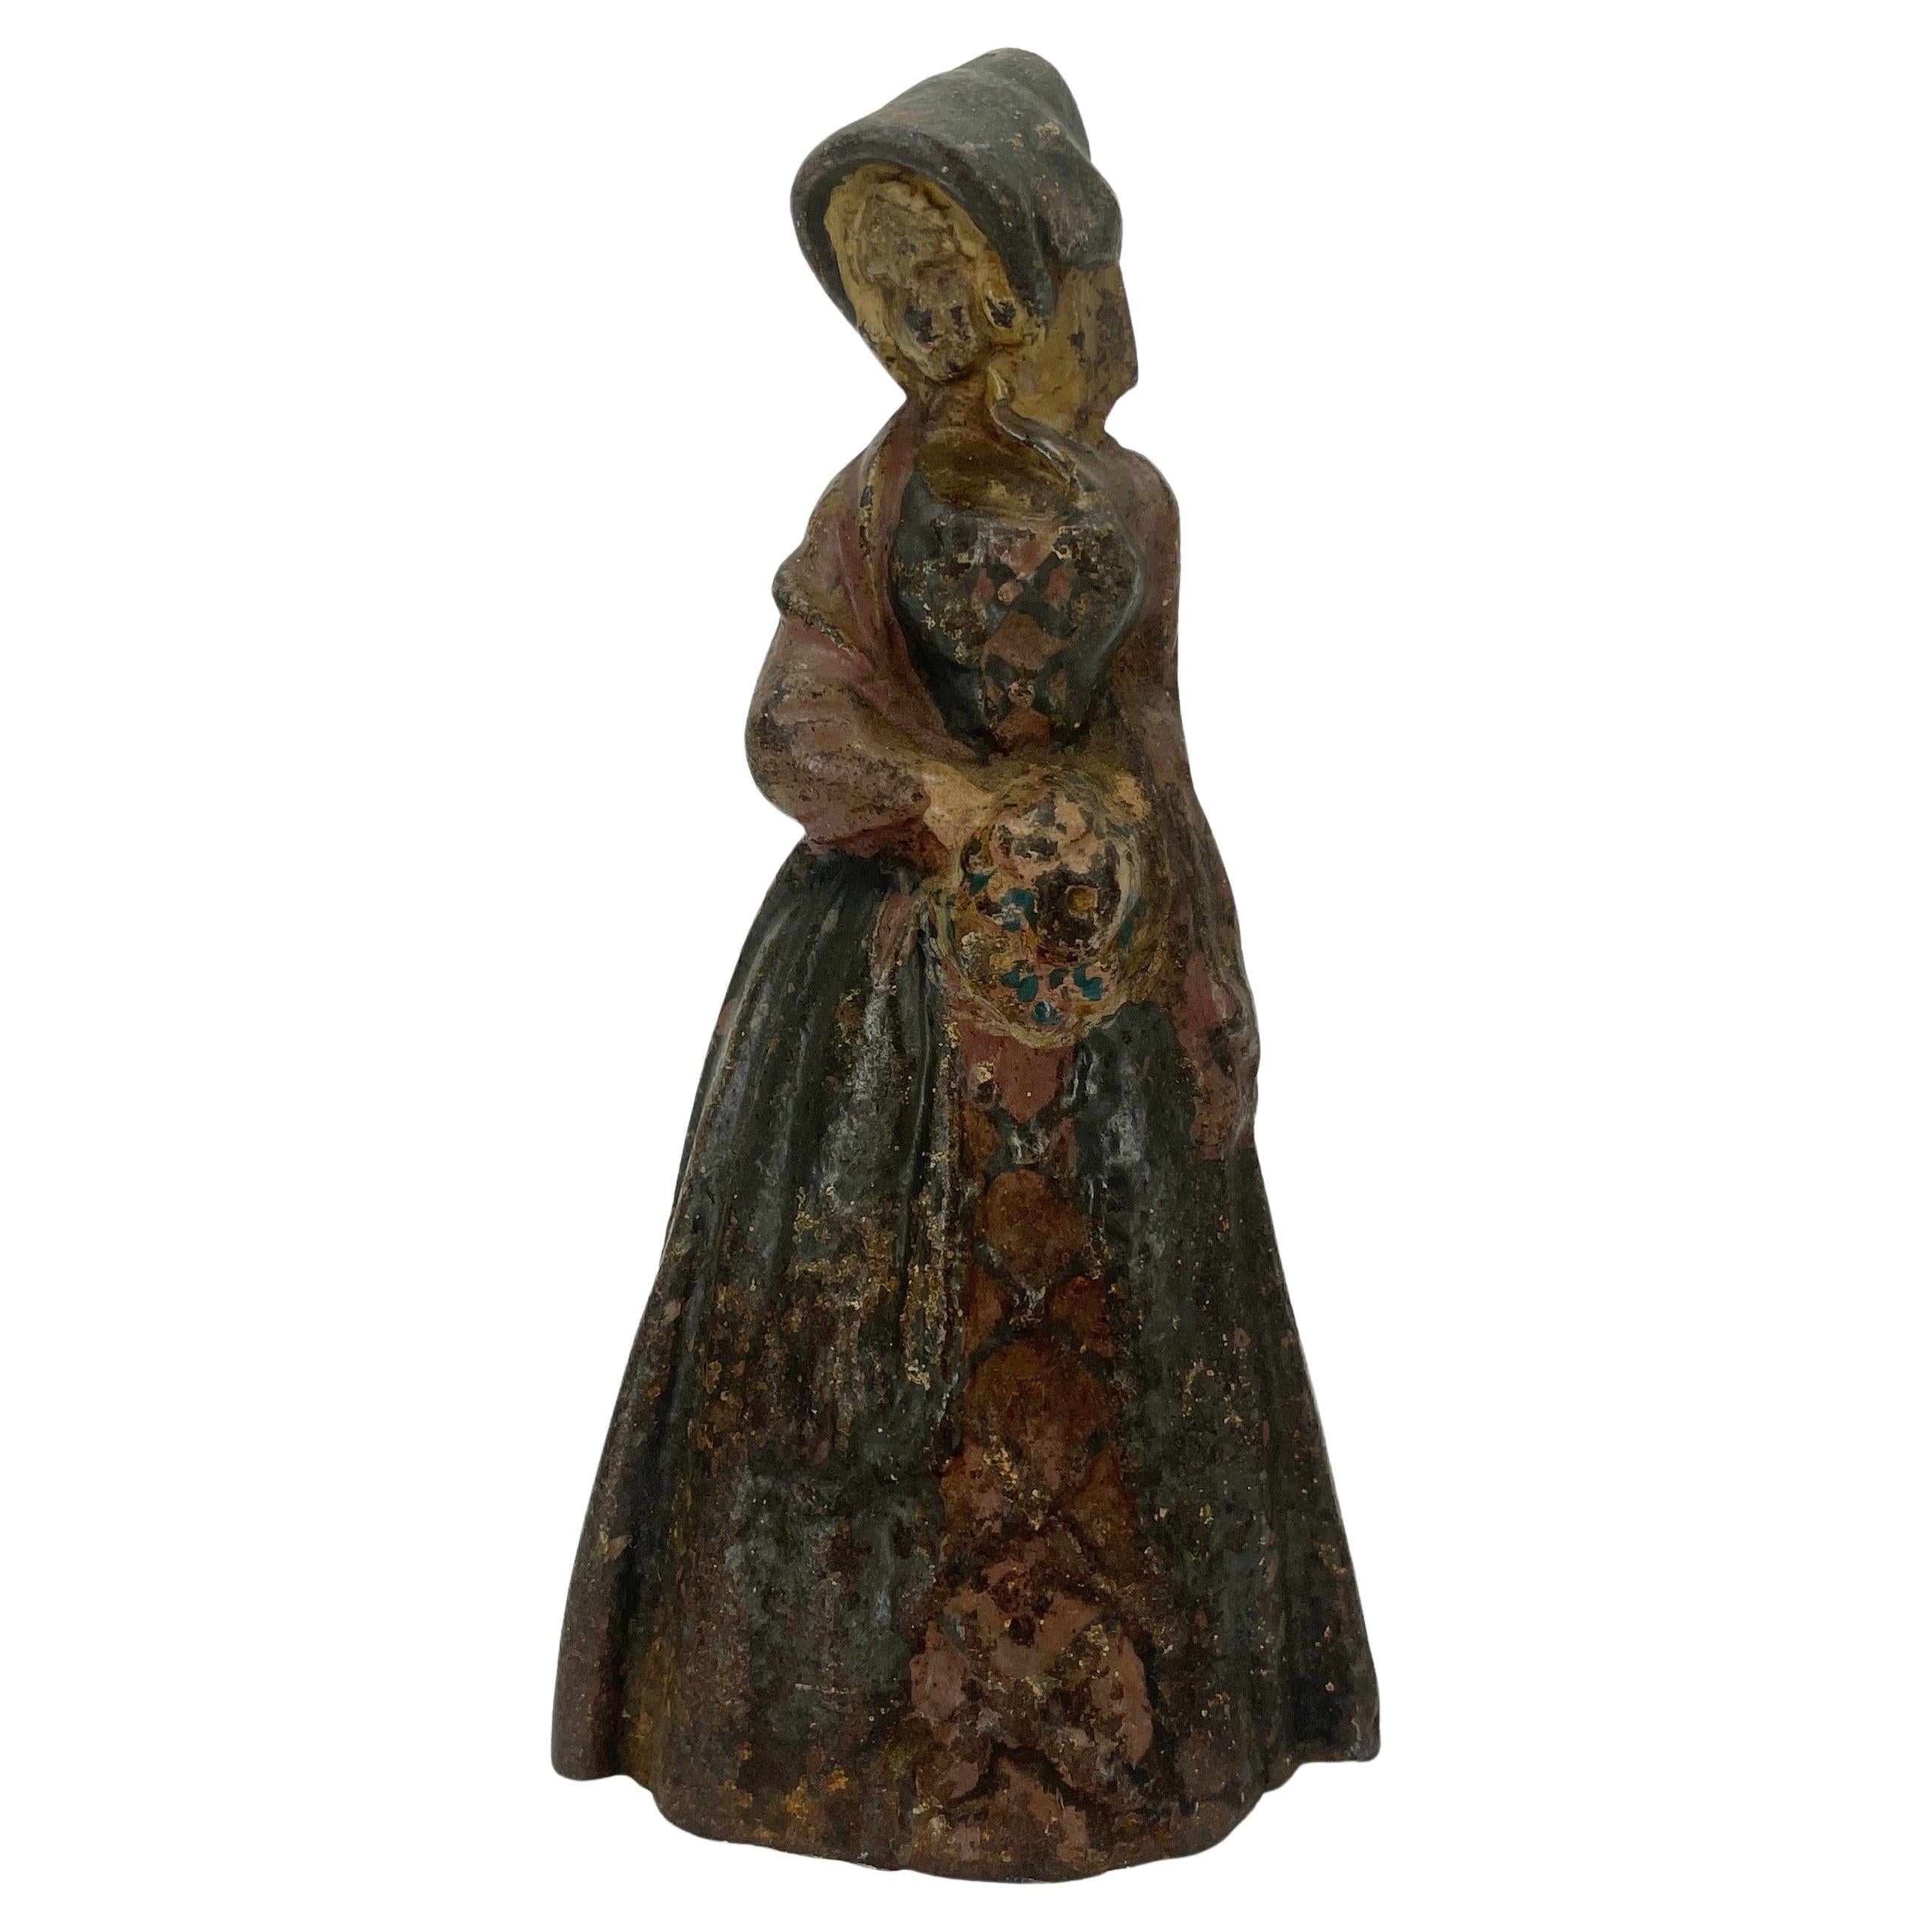 Late 19th century door stop, France, circa 1880.
This lady sculpture is made in heavy solid cast iron and is in it original hand-painted colors.